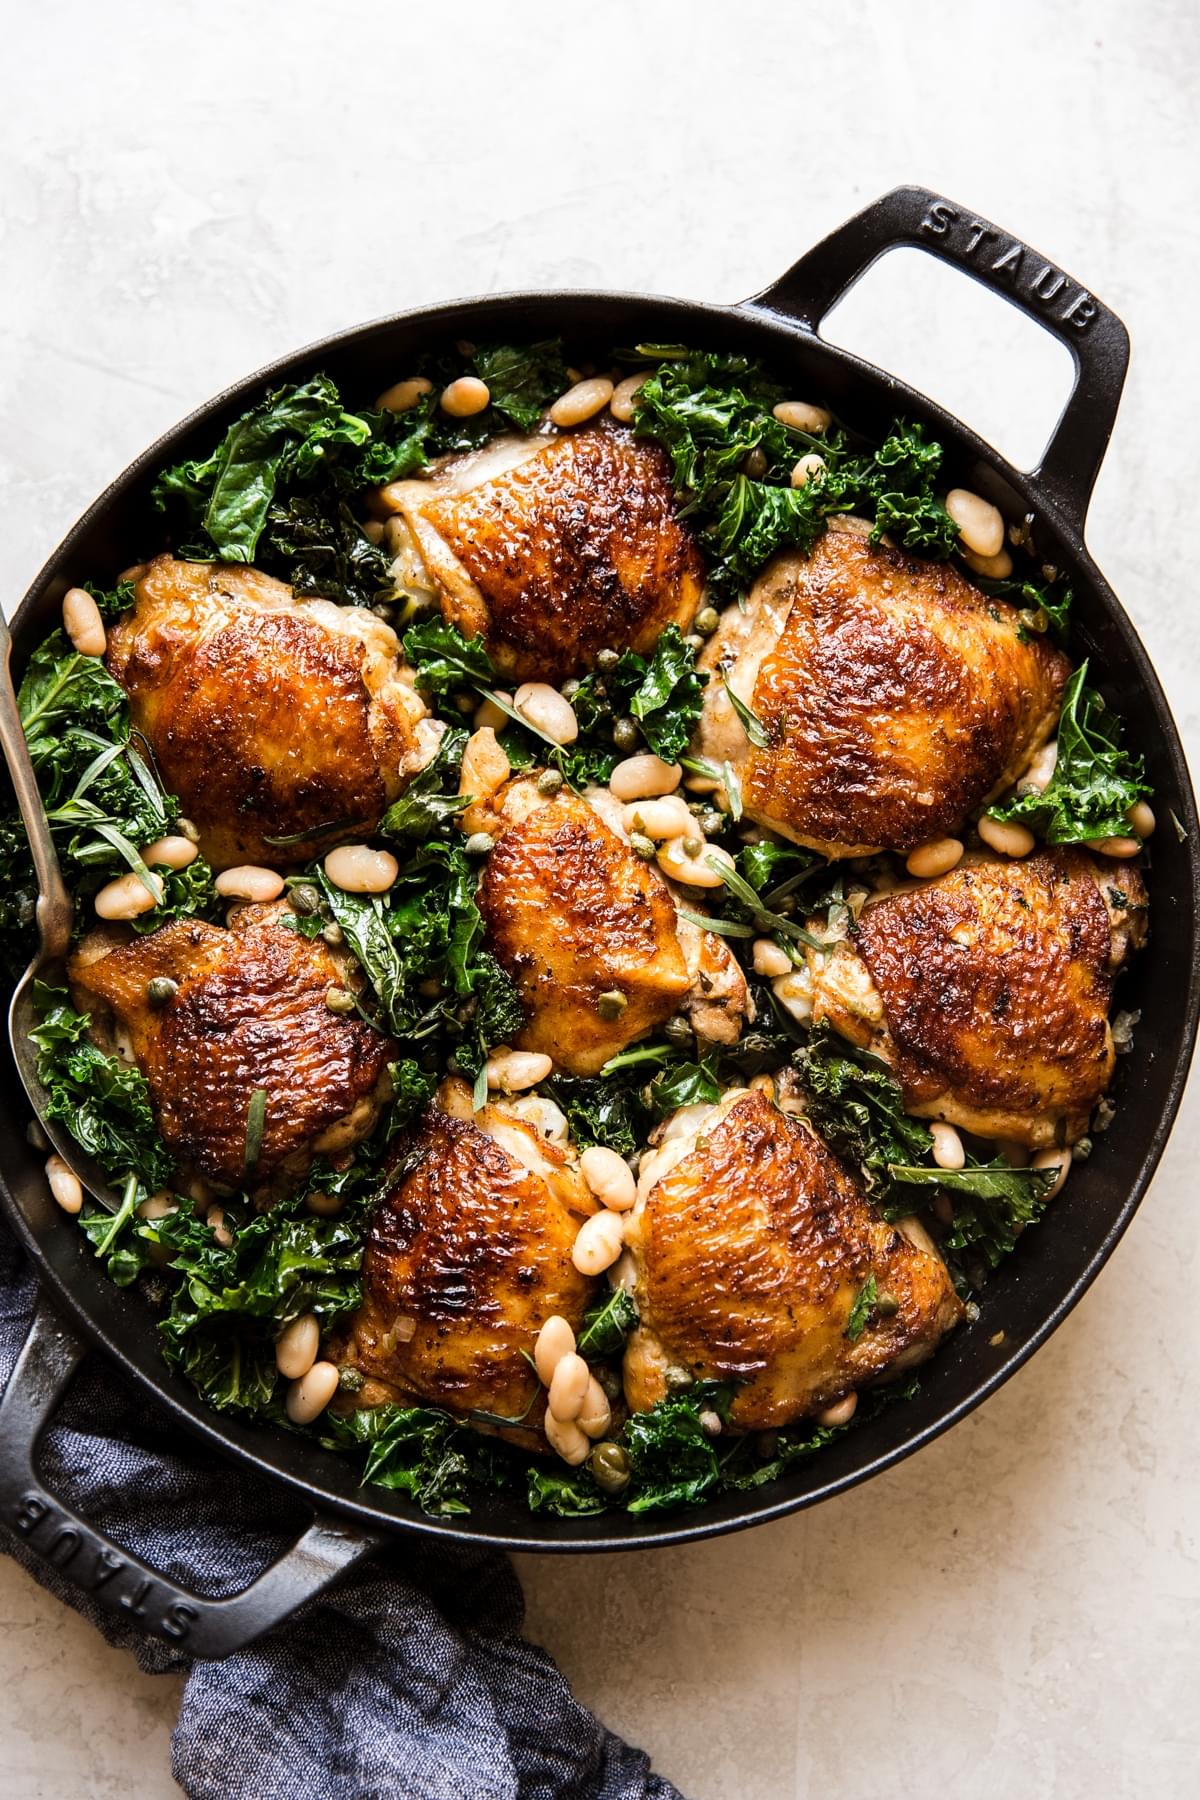 cast iron braiser with one pot braised chicken and kale with white beans